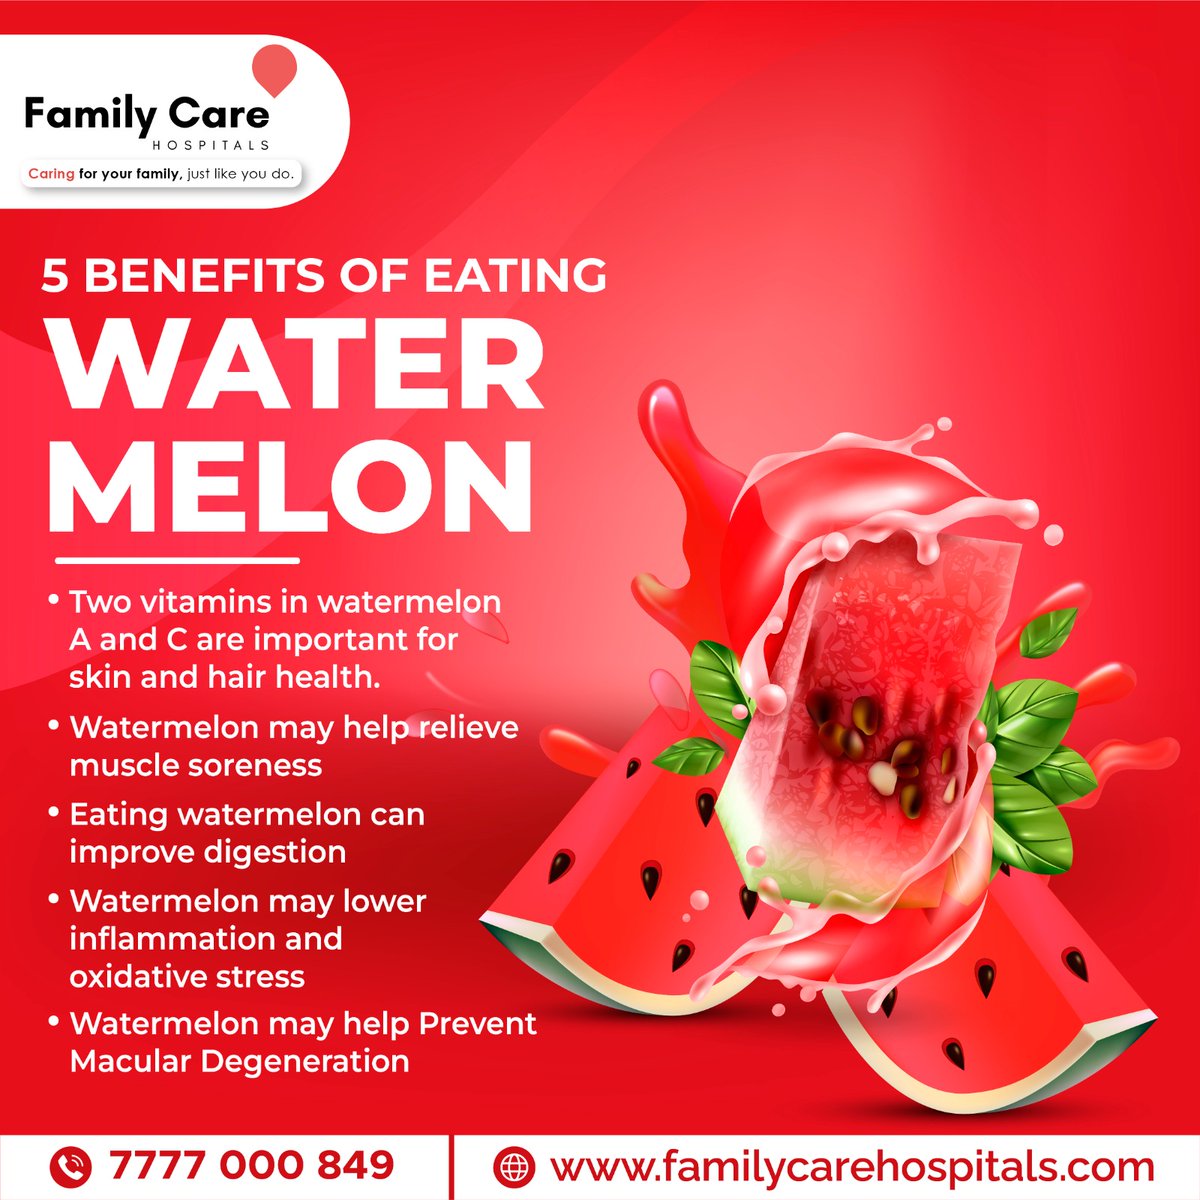 Watermelon is refreshing and delicious food which contains high percentage of water which help us to remain hydrated, Here are the benefits of eating watermelon. 

#FCH #Familycare #FamilyCareHospitals #benefitsofwatermelon #Nutrition #NutritionFacts #Watermelon #Watermelonsalad